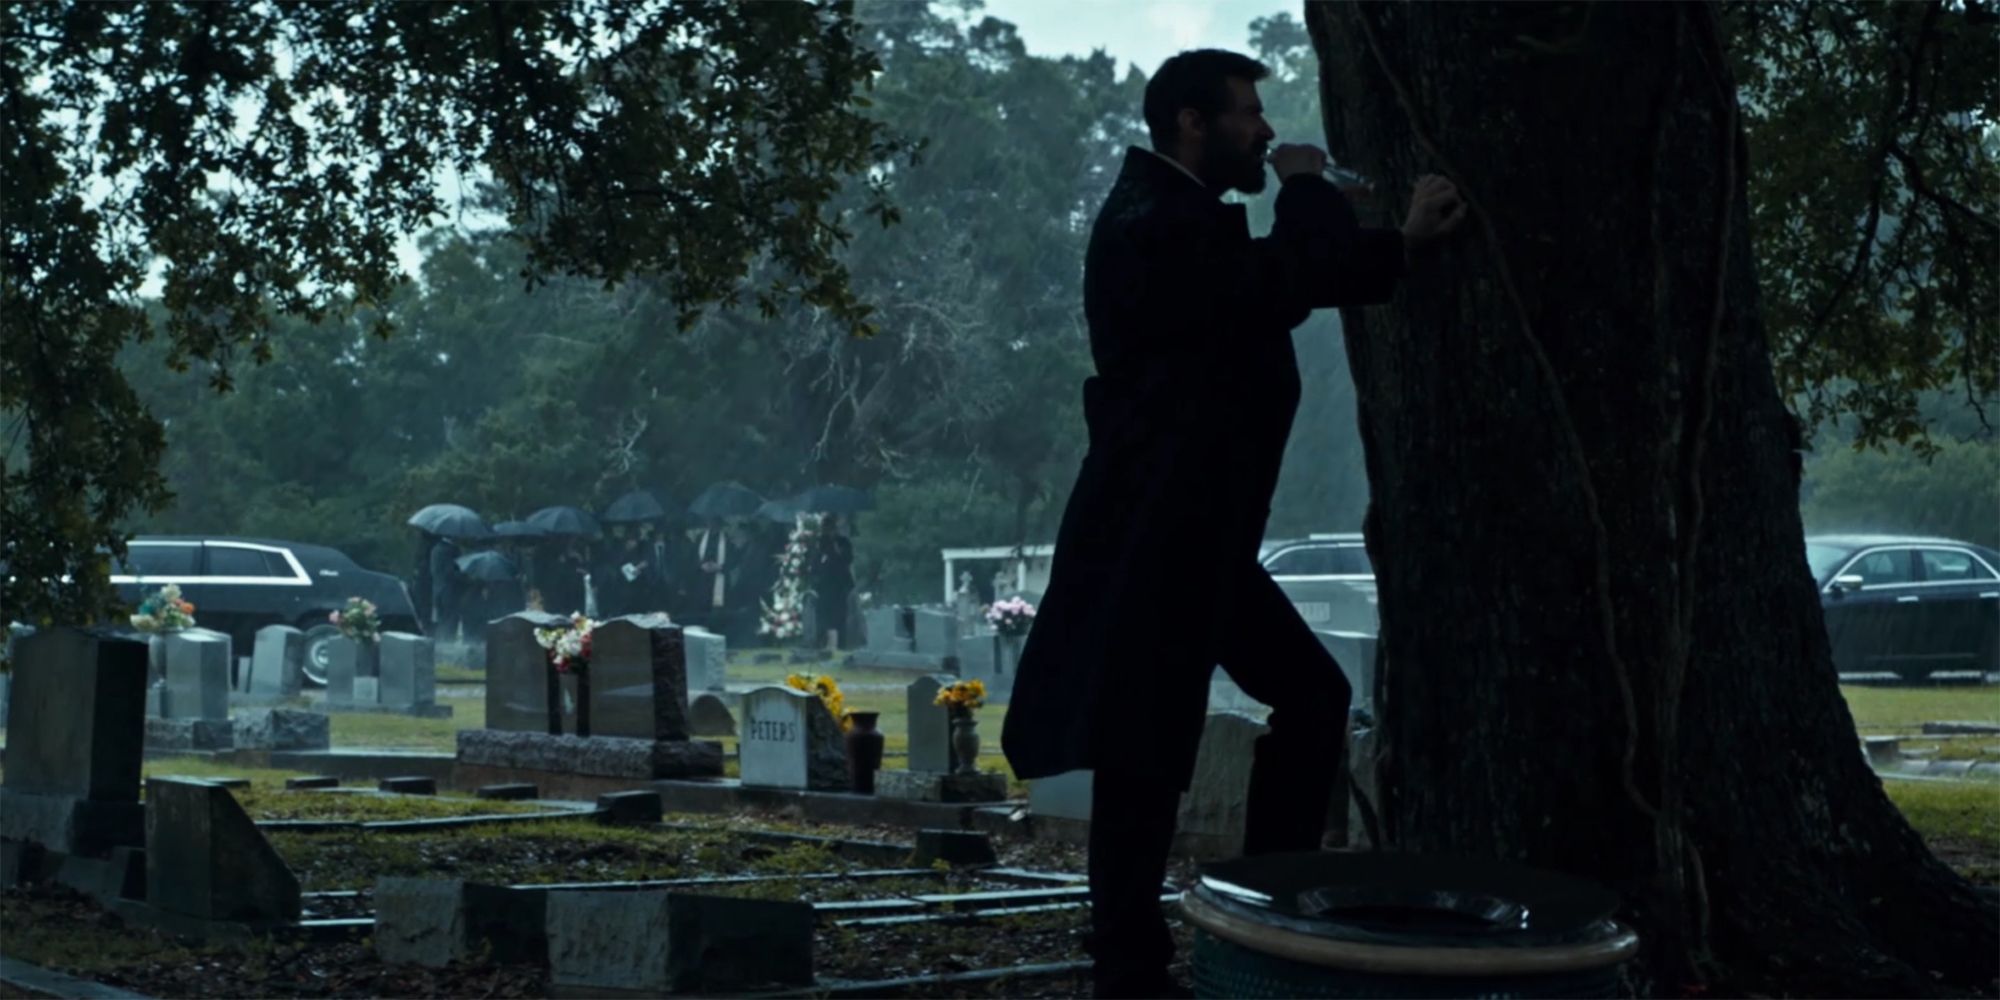 Logan leaning against a tree in a graveyard